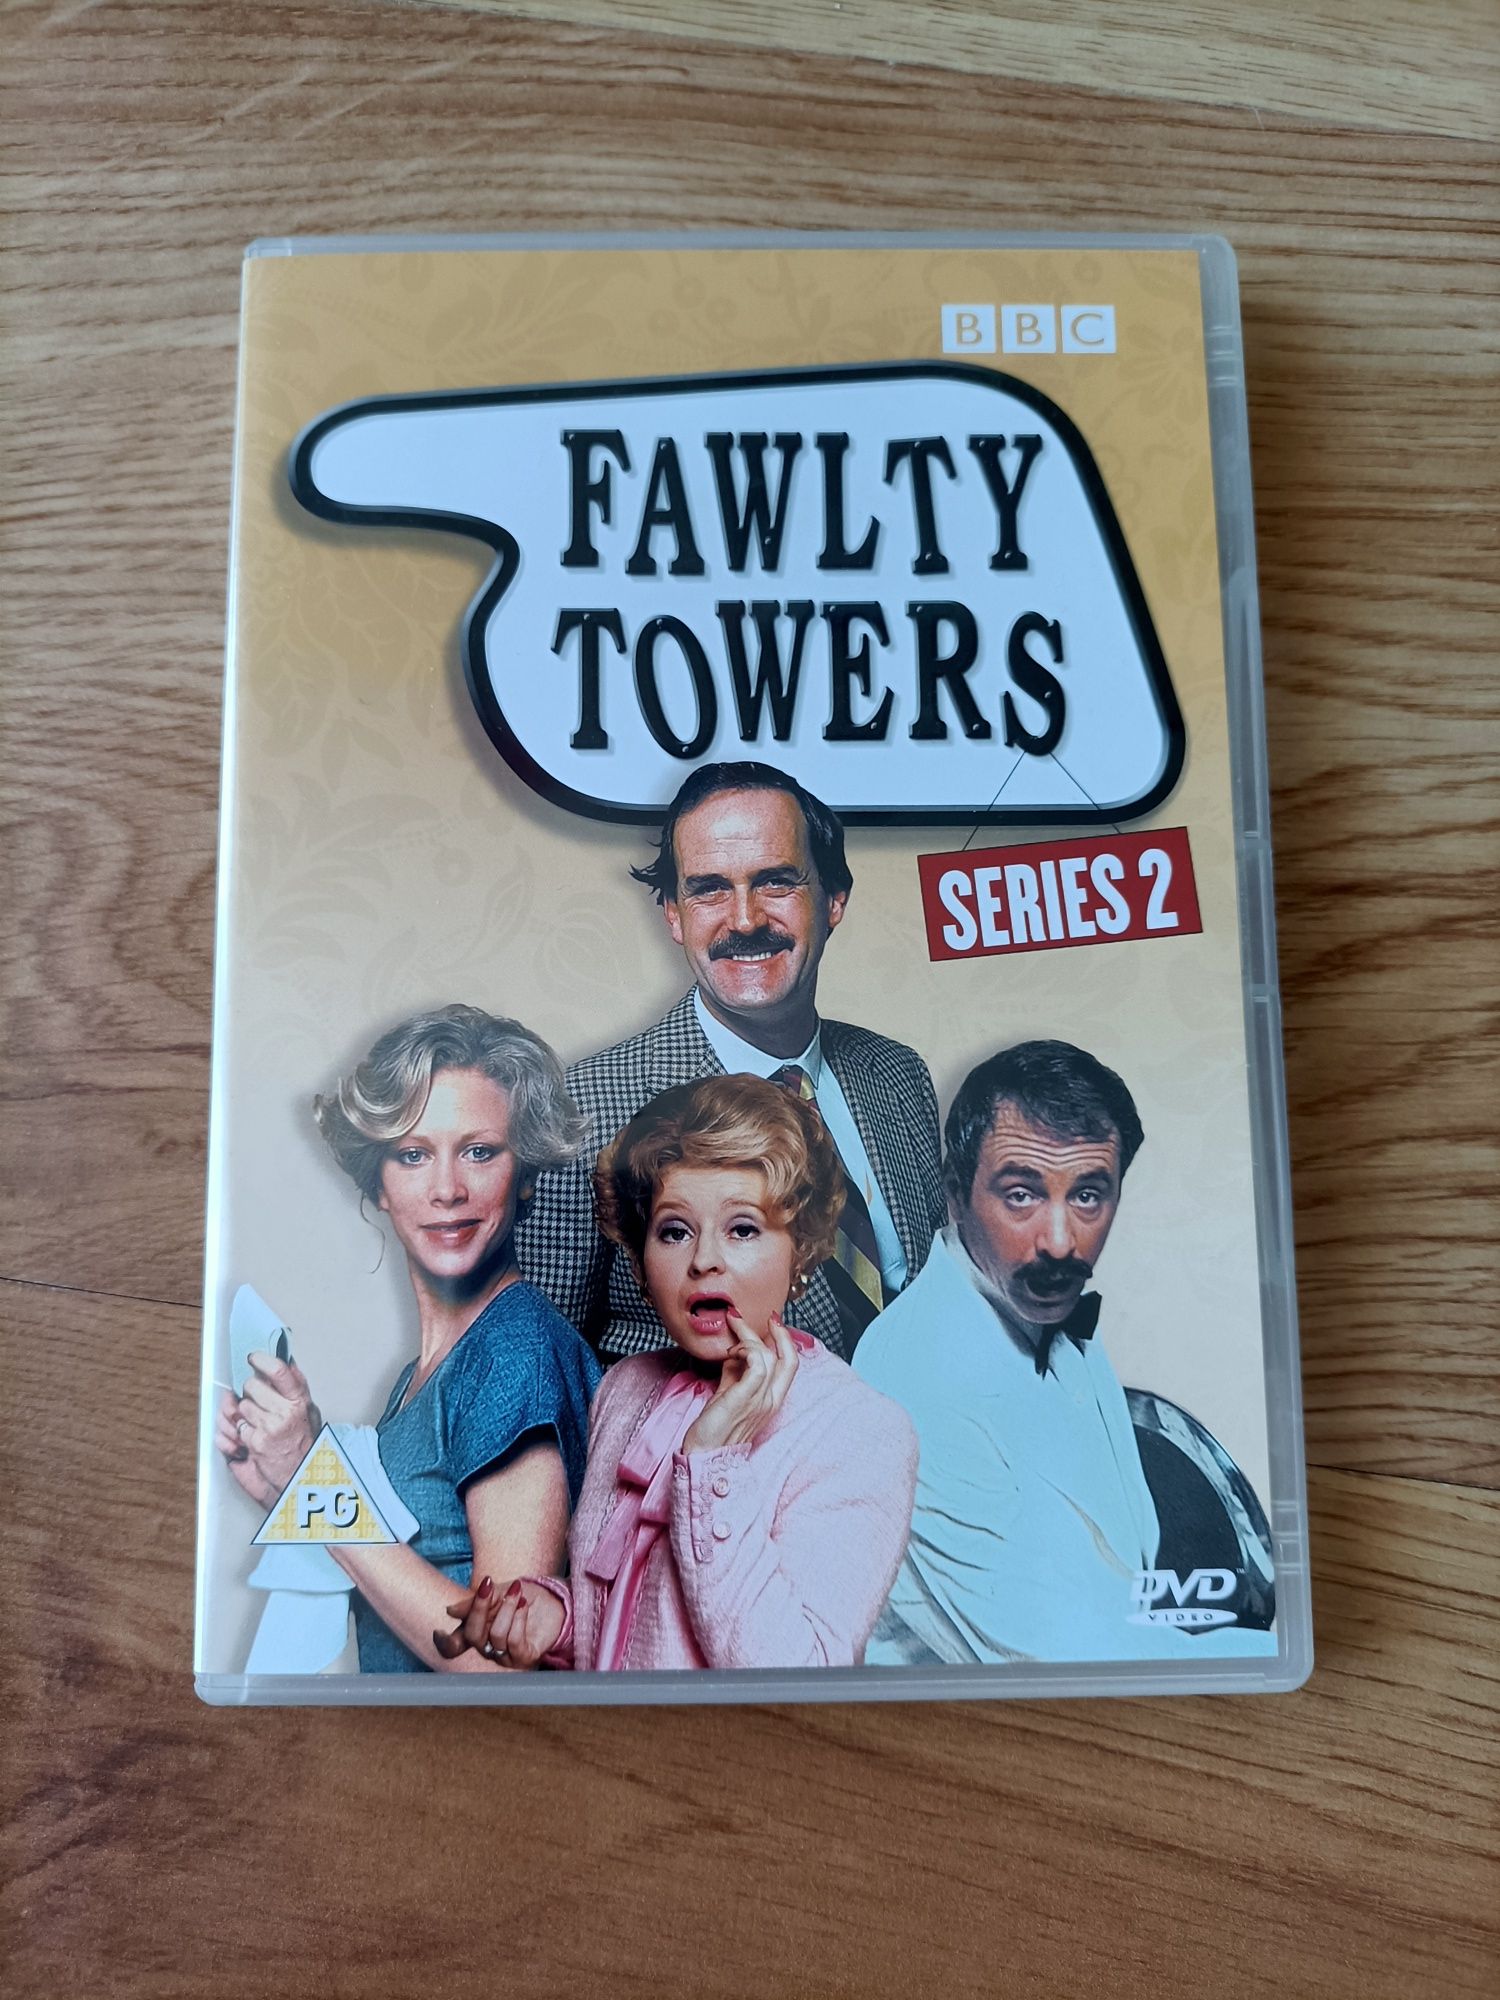 Fawlty Towers series 2 DVD